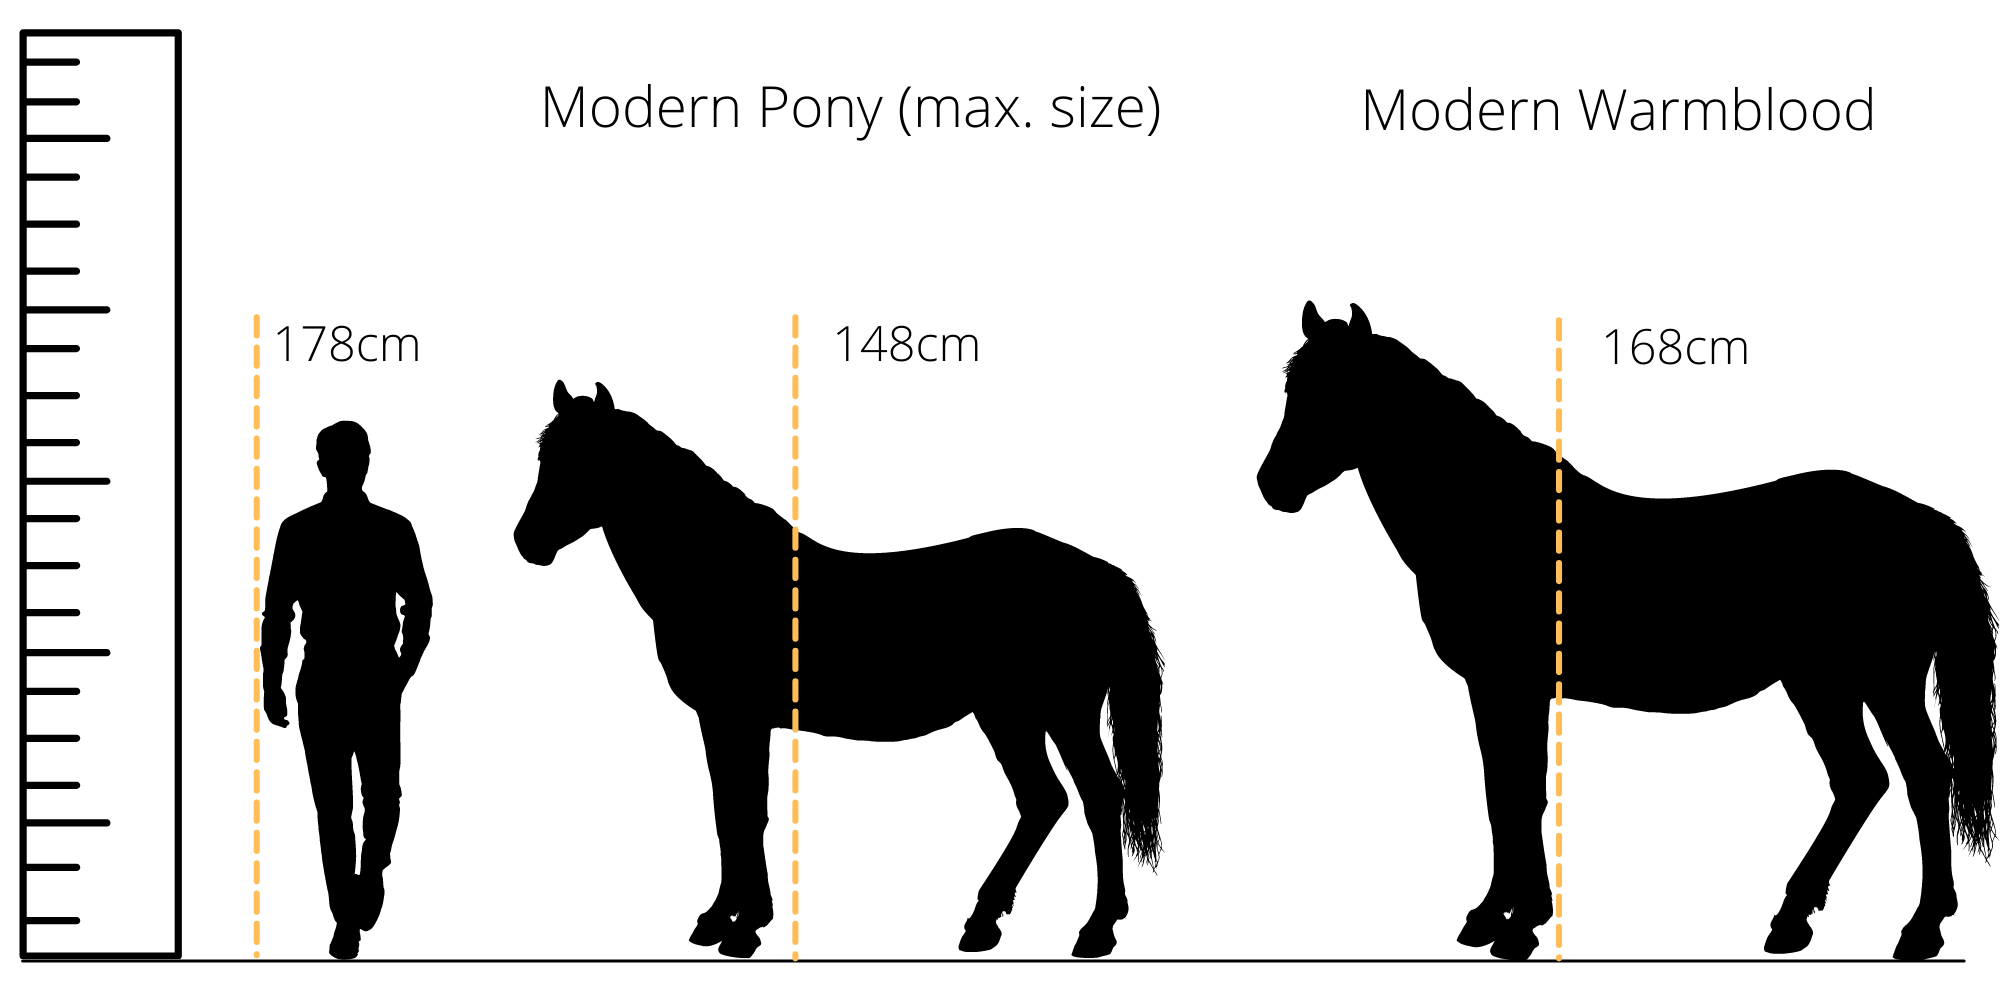 silhouettes of a human, a horse and a pony next to a scale to show relative sizes.